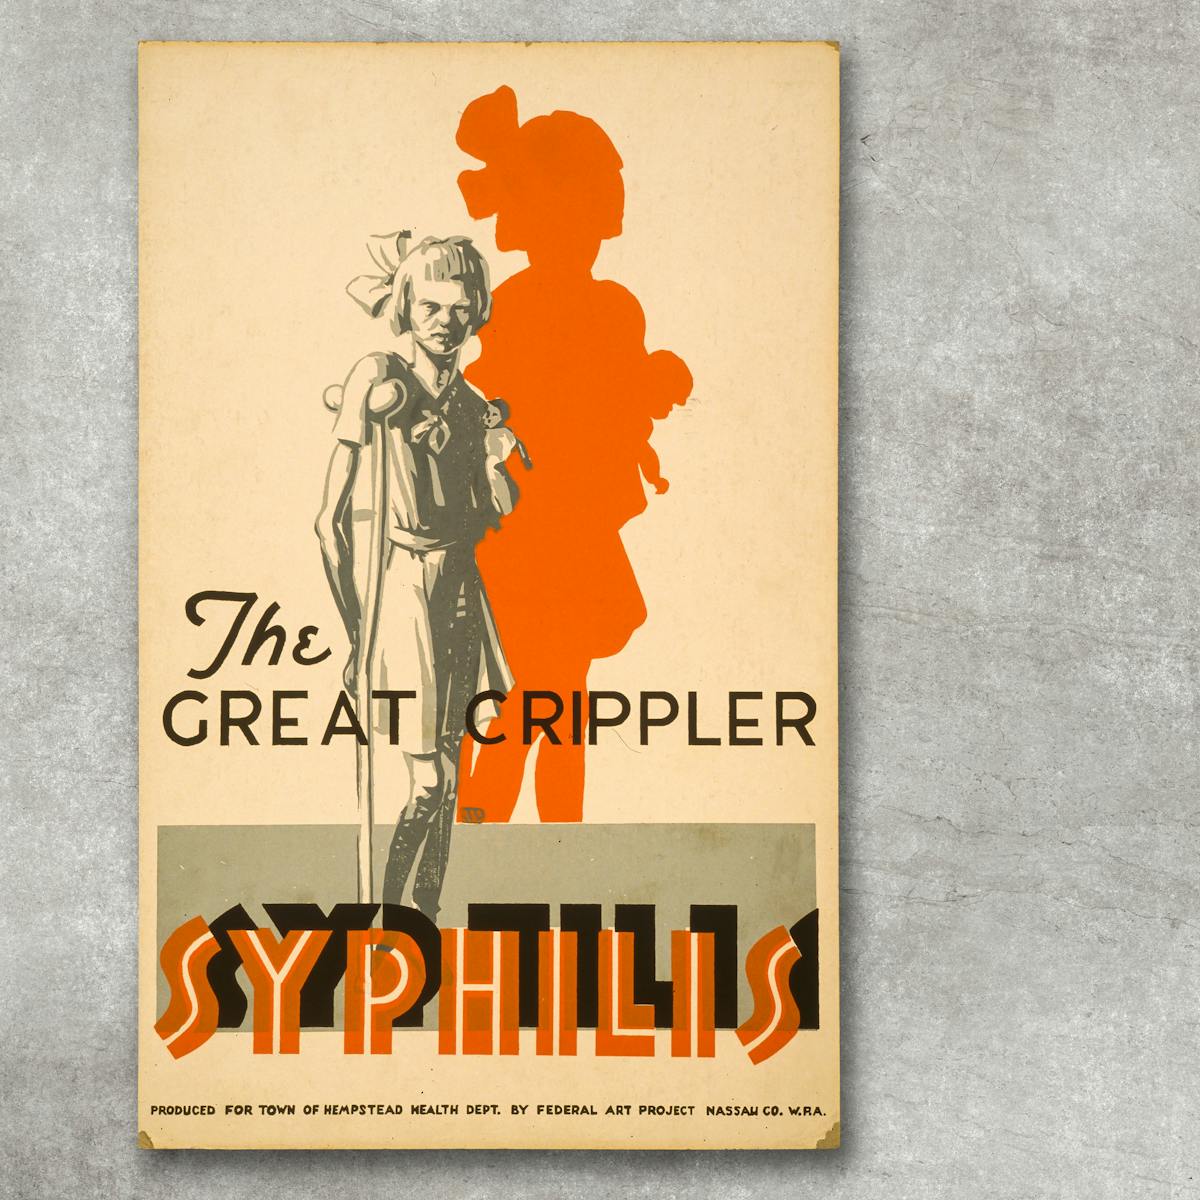 Poster warning of the dangers to children from syphilis, showing a young girl standing with a crutch.